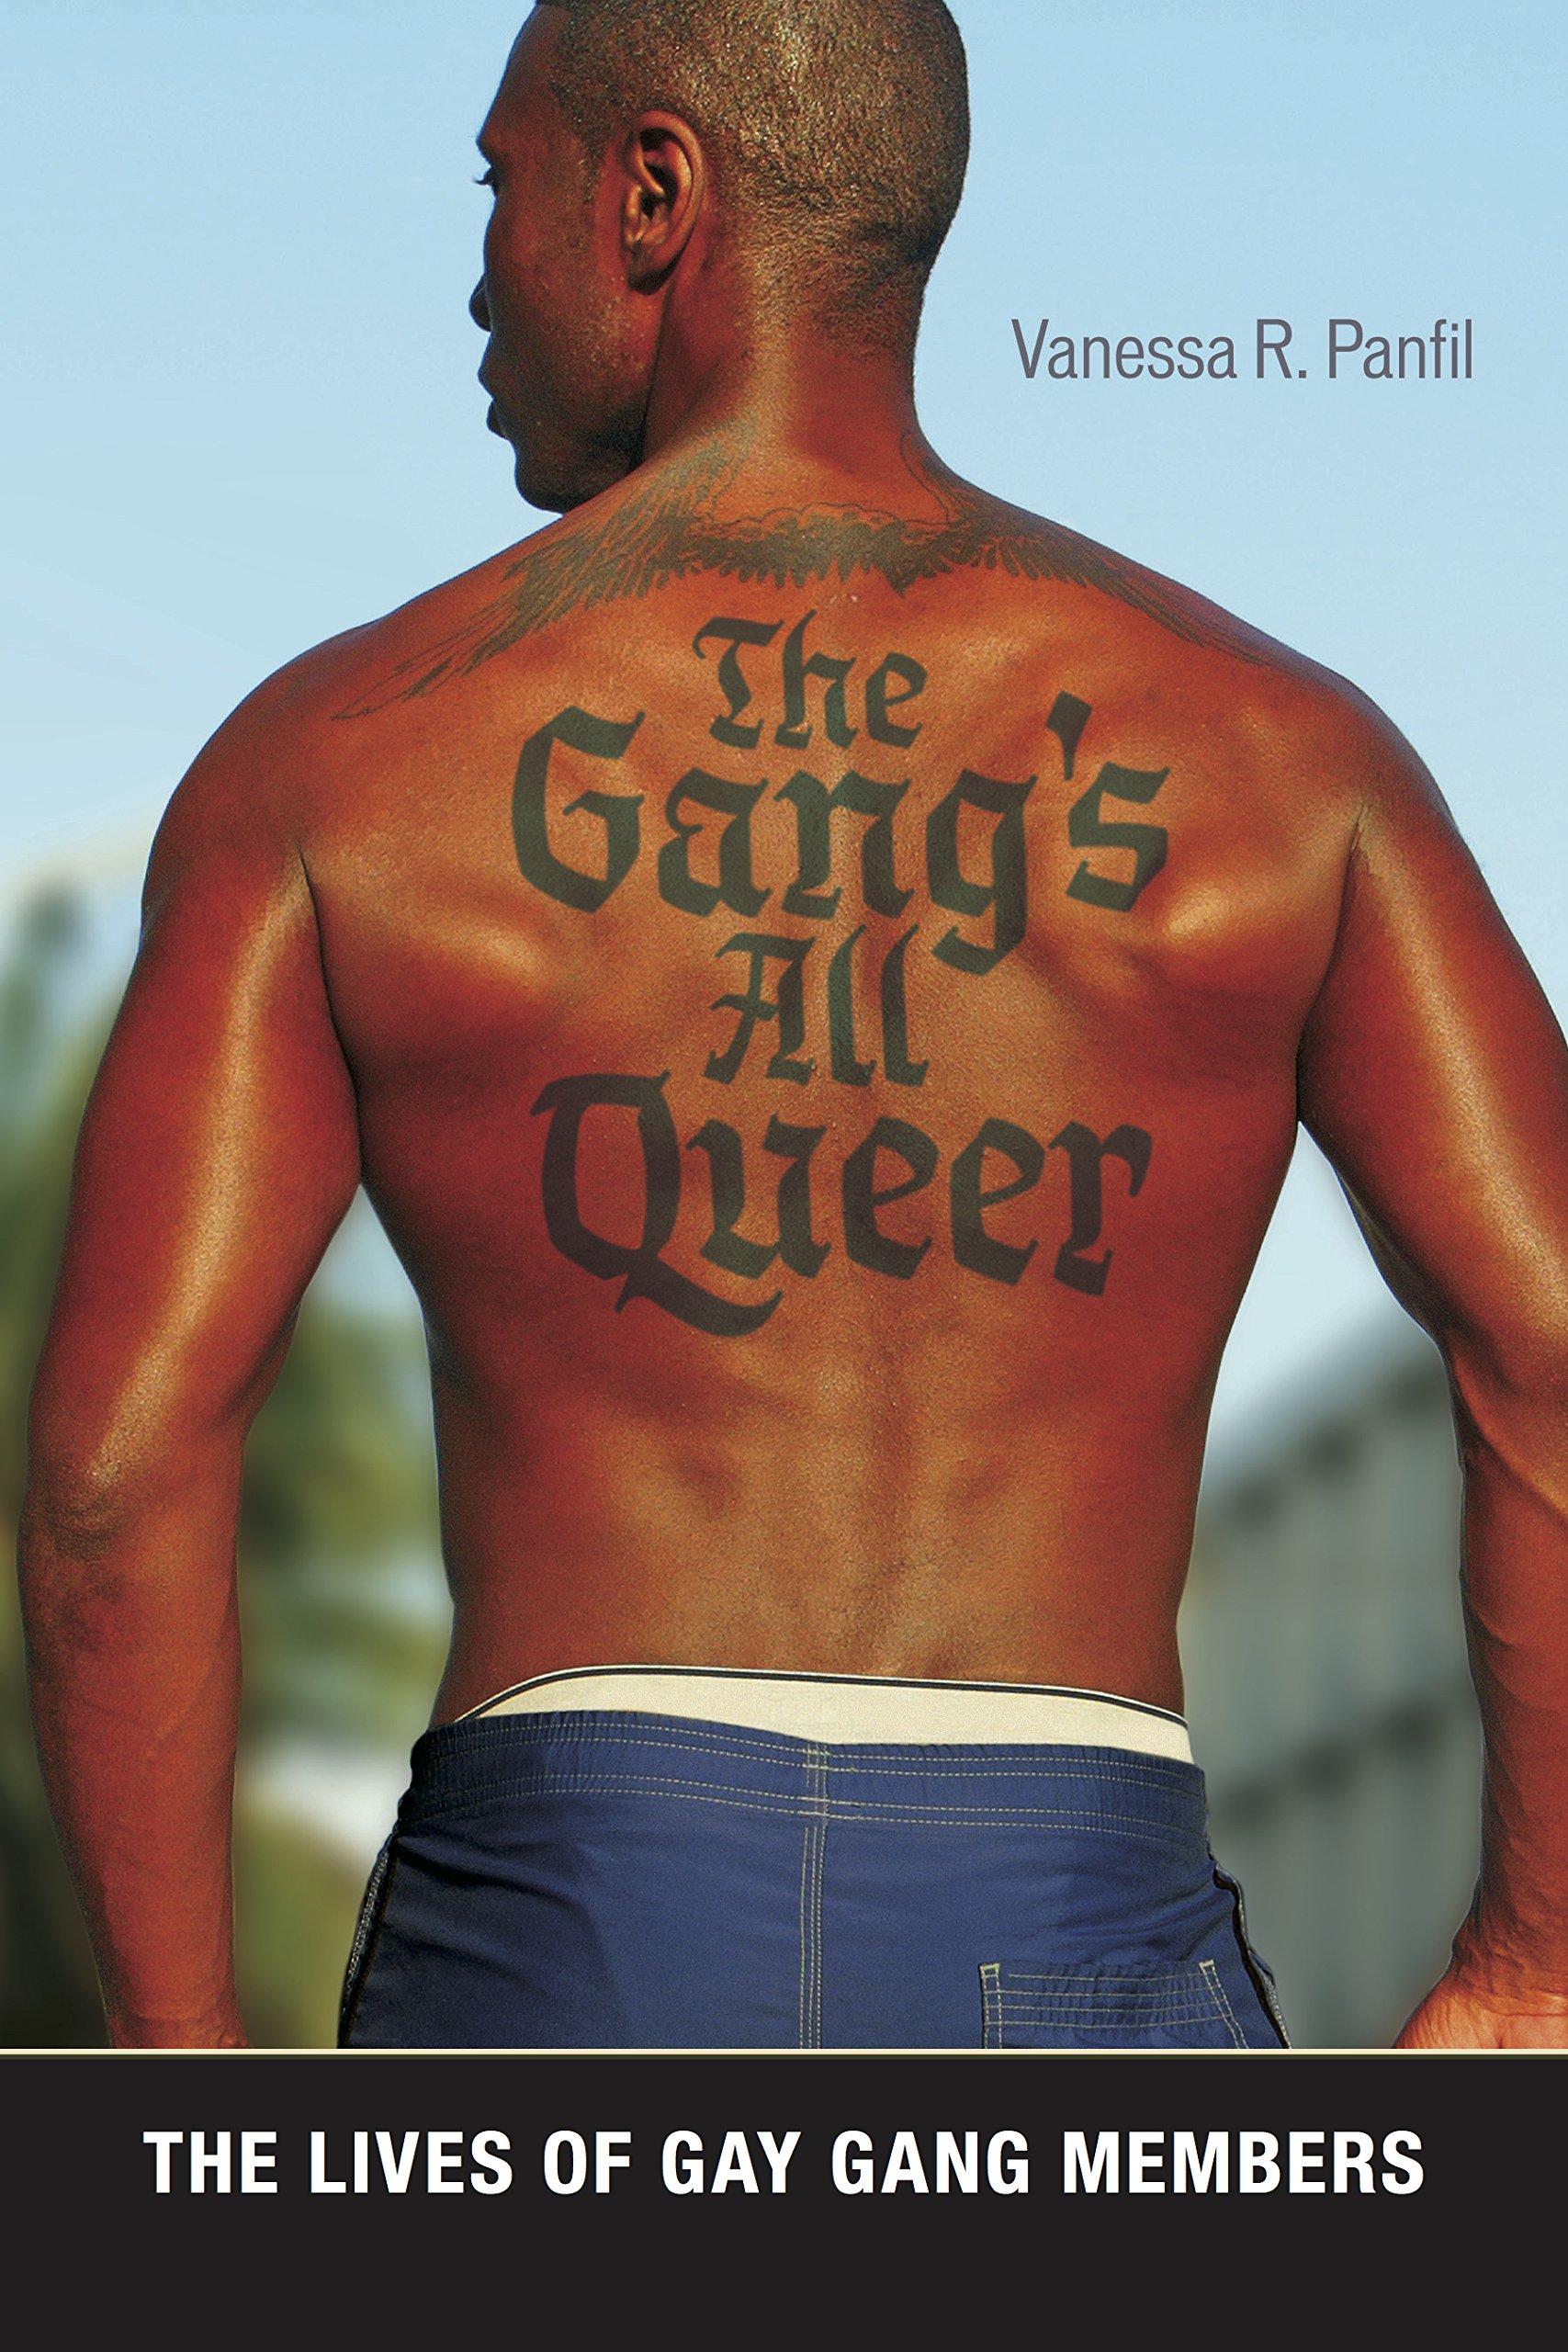 The Gang S All Queer Documents Lives Of Gay Gang Members